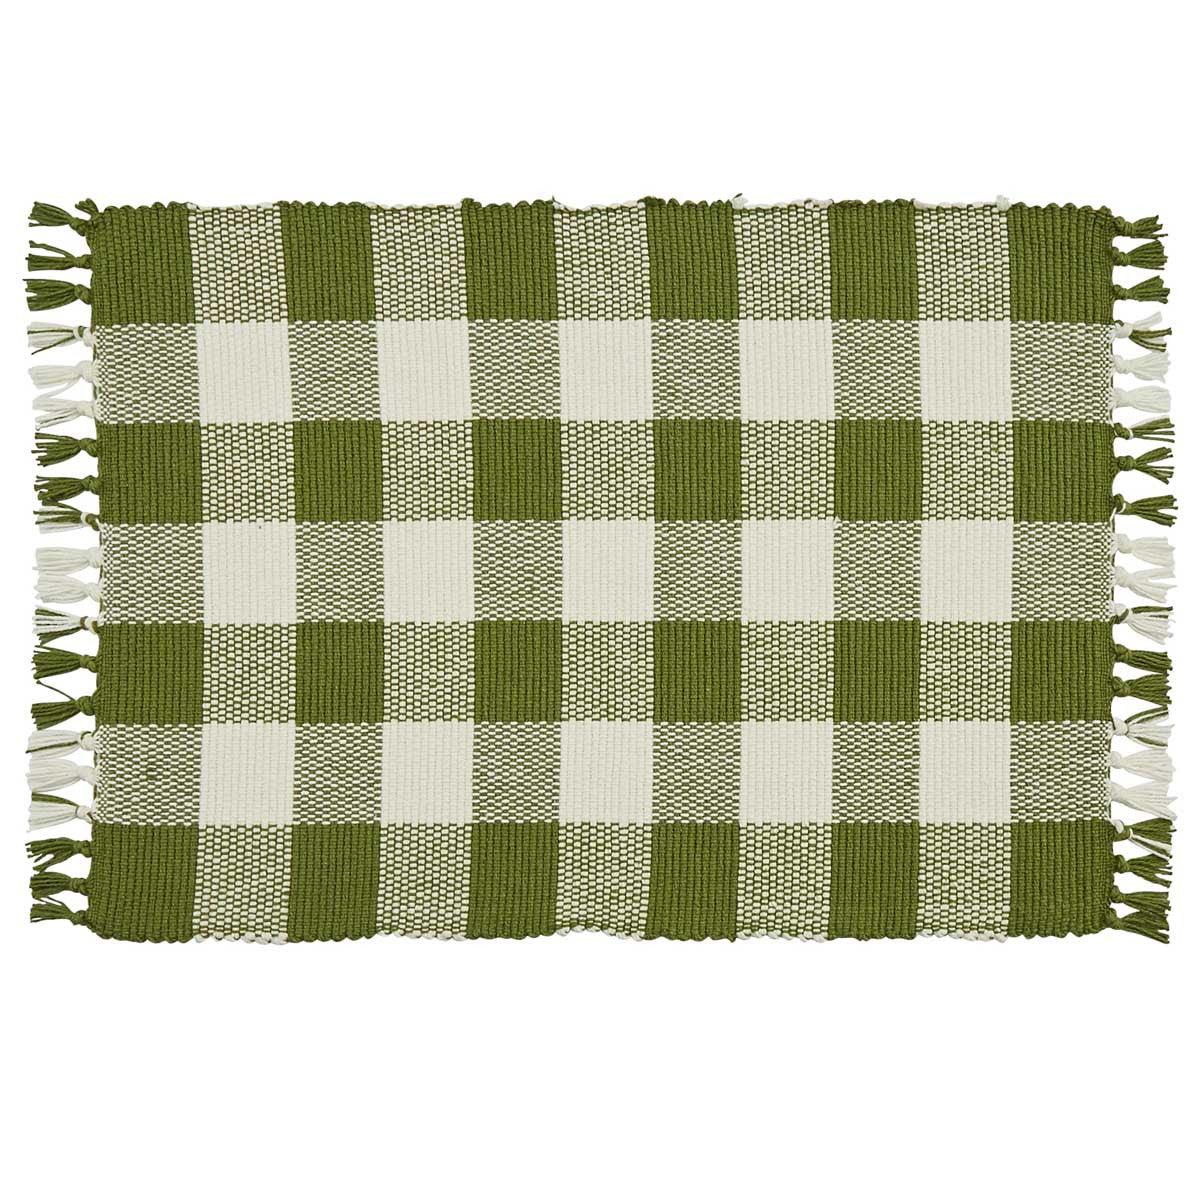 Wicklow Check Placemats - Sage Set Of 6 Park Designs - The Fox Decor